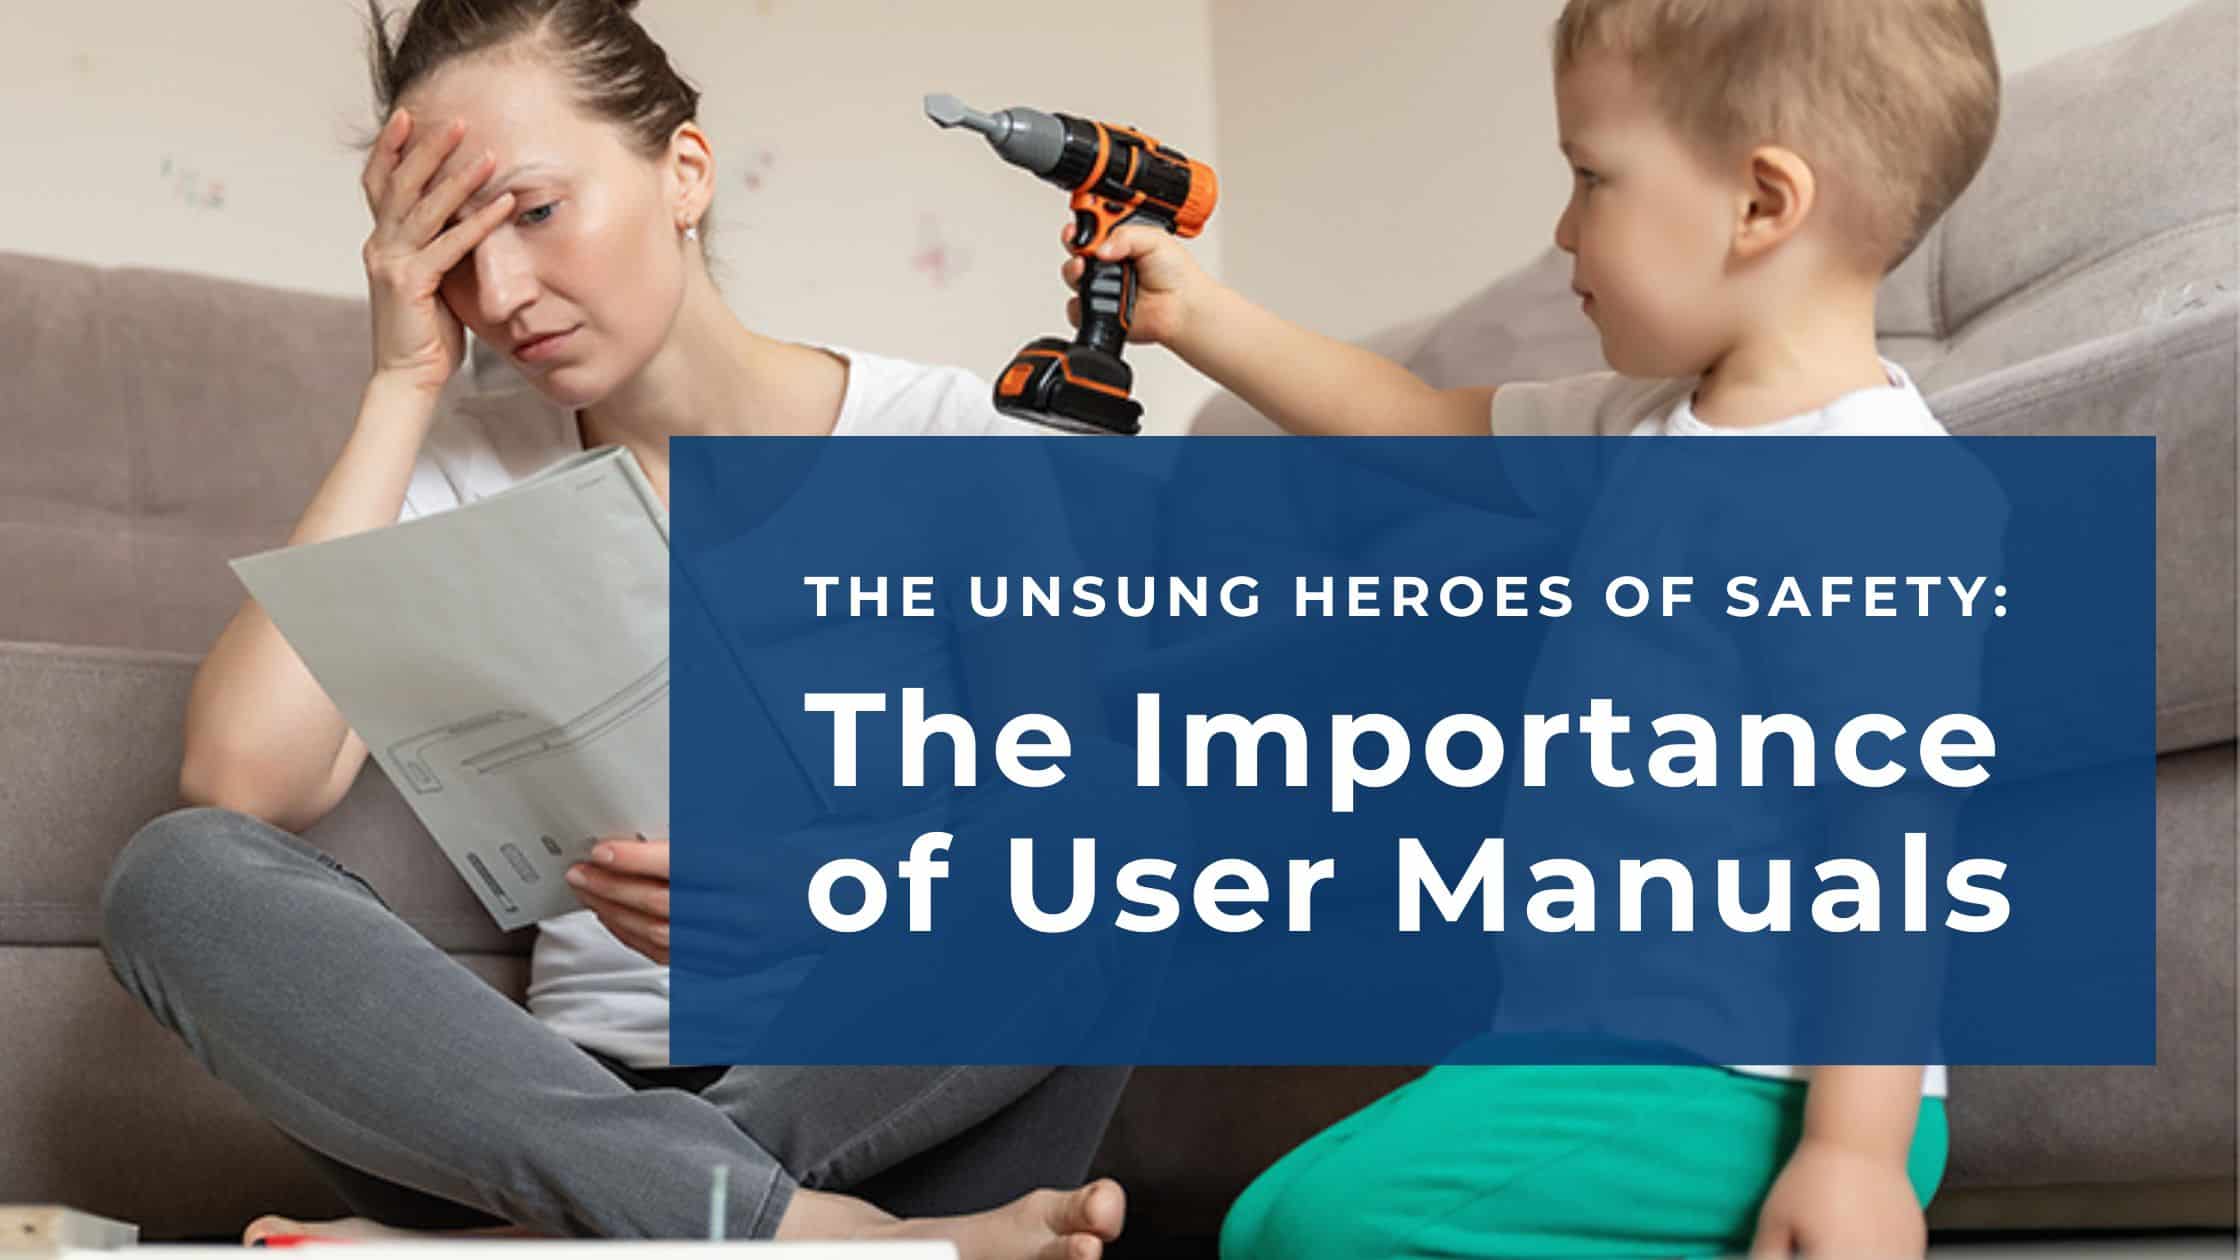 The Unsung Heroes of Safety: The Importance of User Manuals